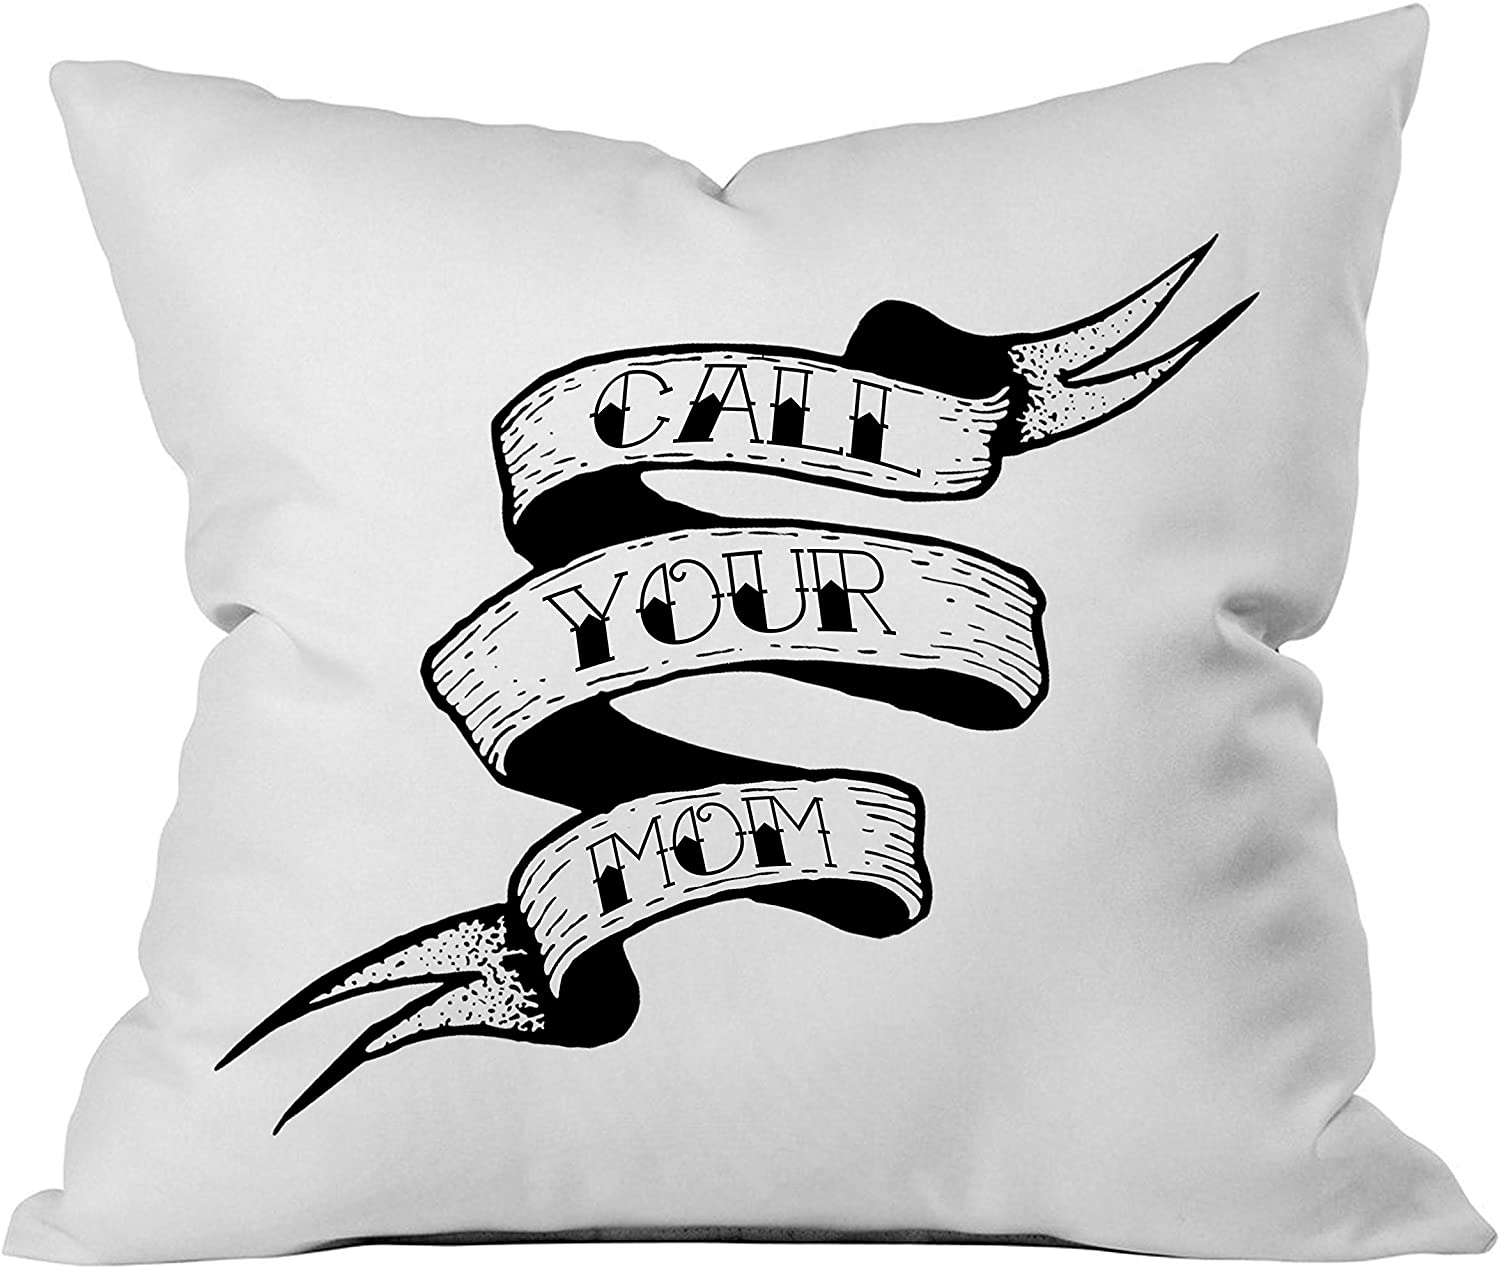 "Call Your Mom" Throw Pillow Cover